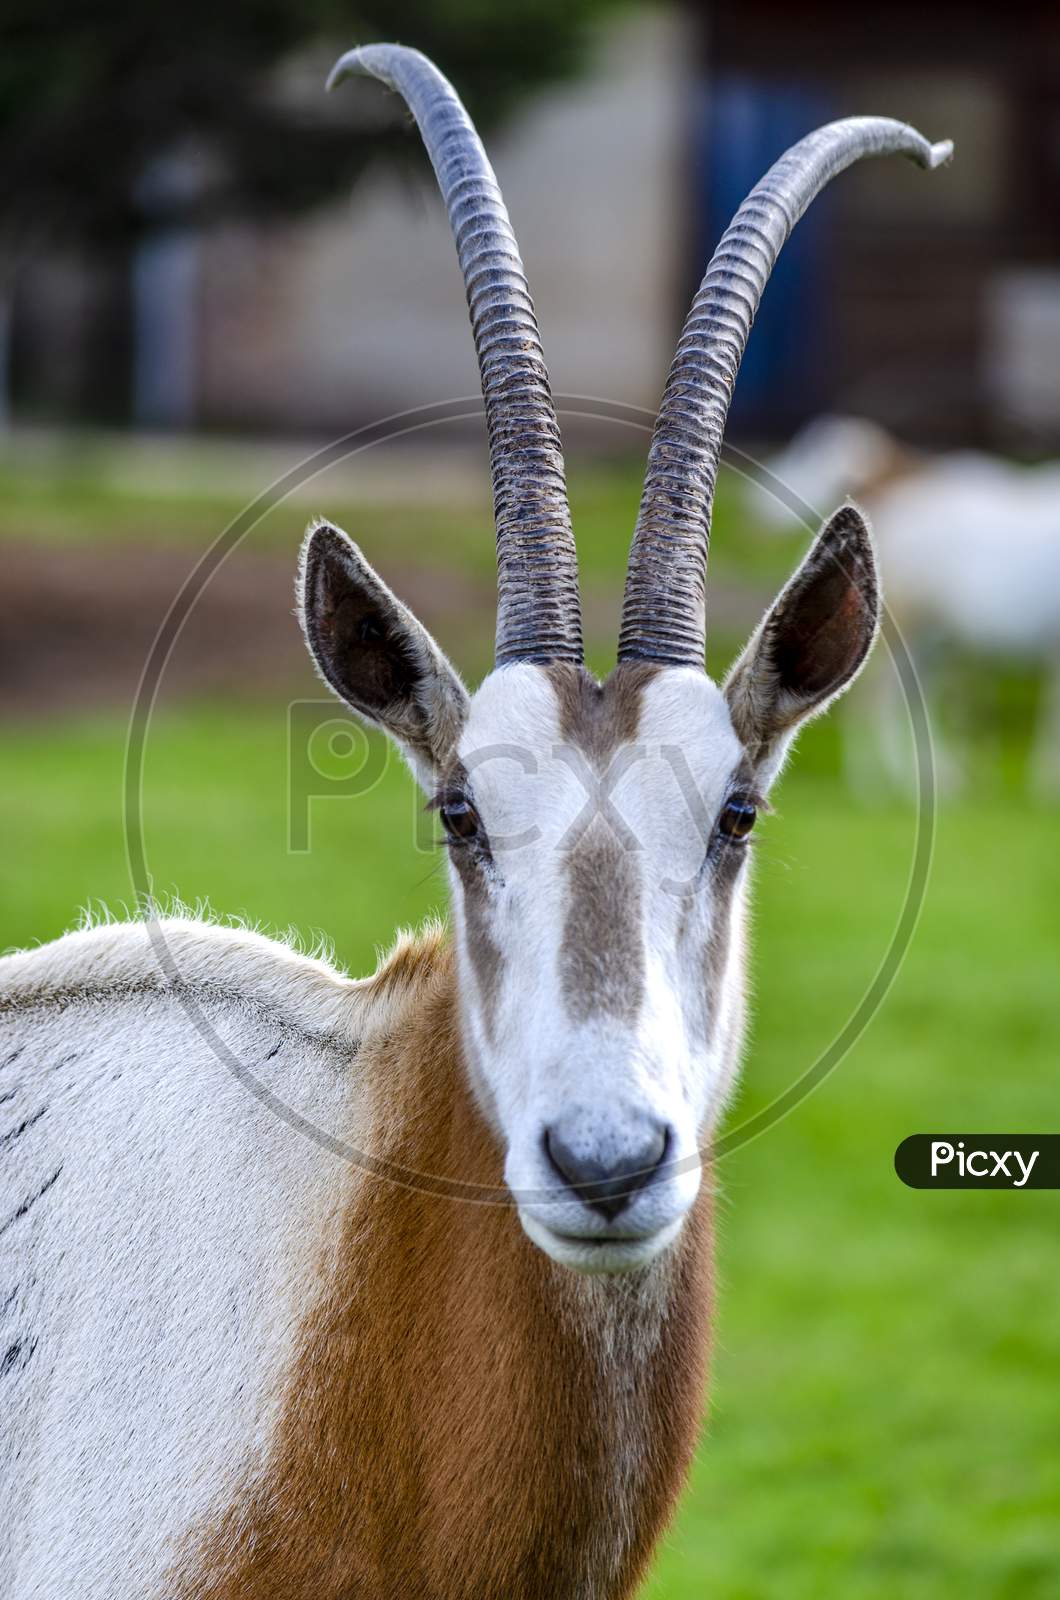 The Scimitar-horned Oryx, also called the Scimitar Oryx, of North Africa is extinct in the wild.